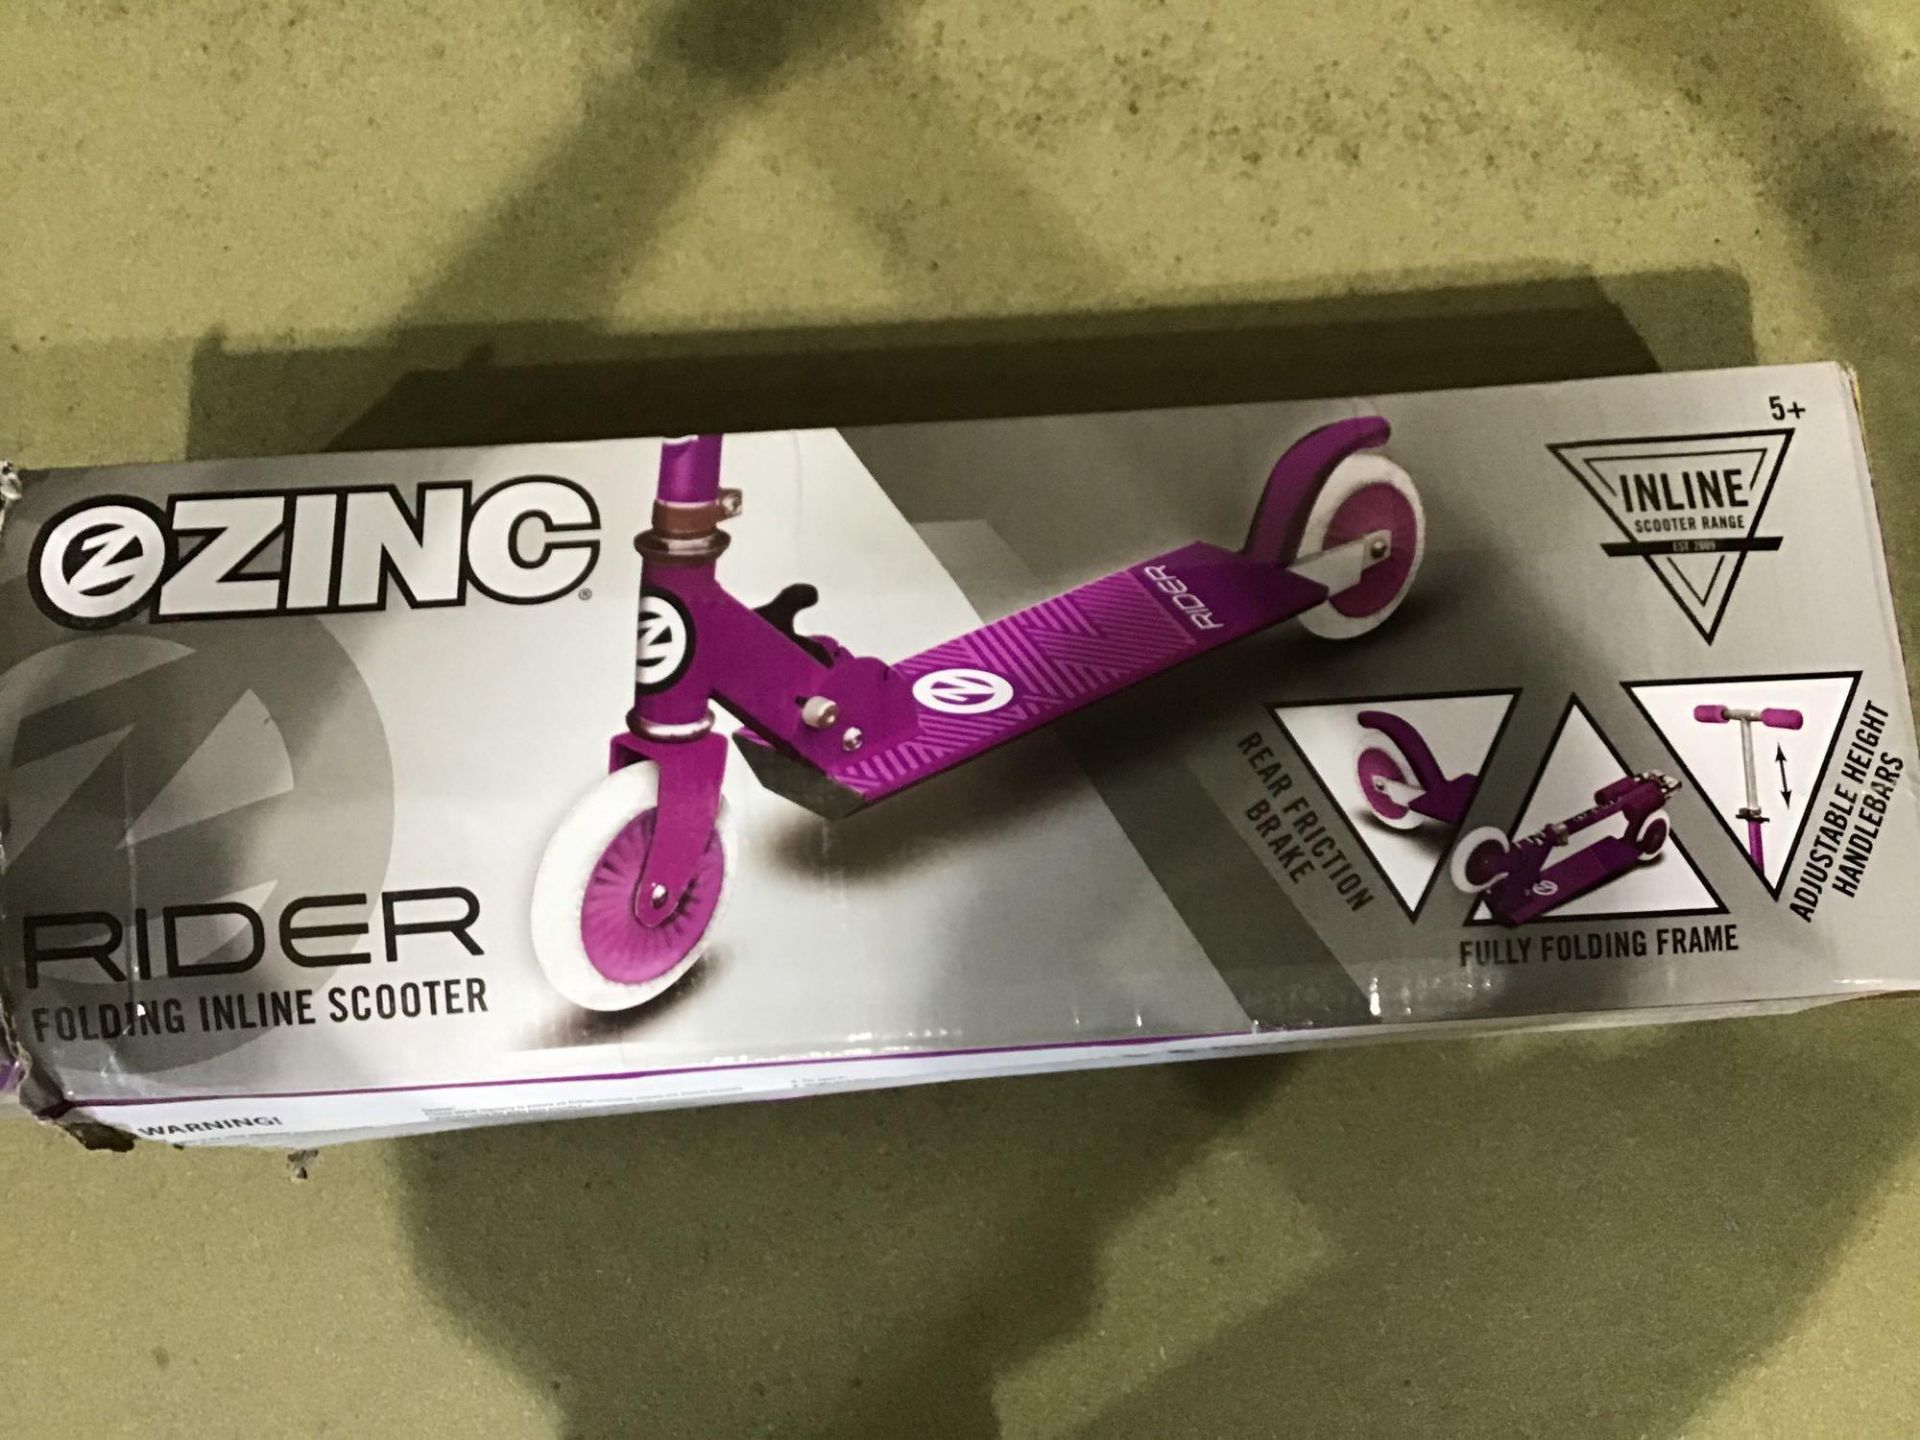 Zinc Folding Inline Scooter - Pink, £15.99 RRP - Image 2 of 4